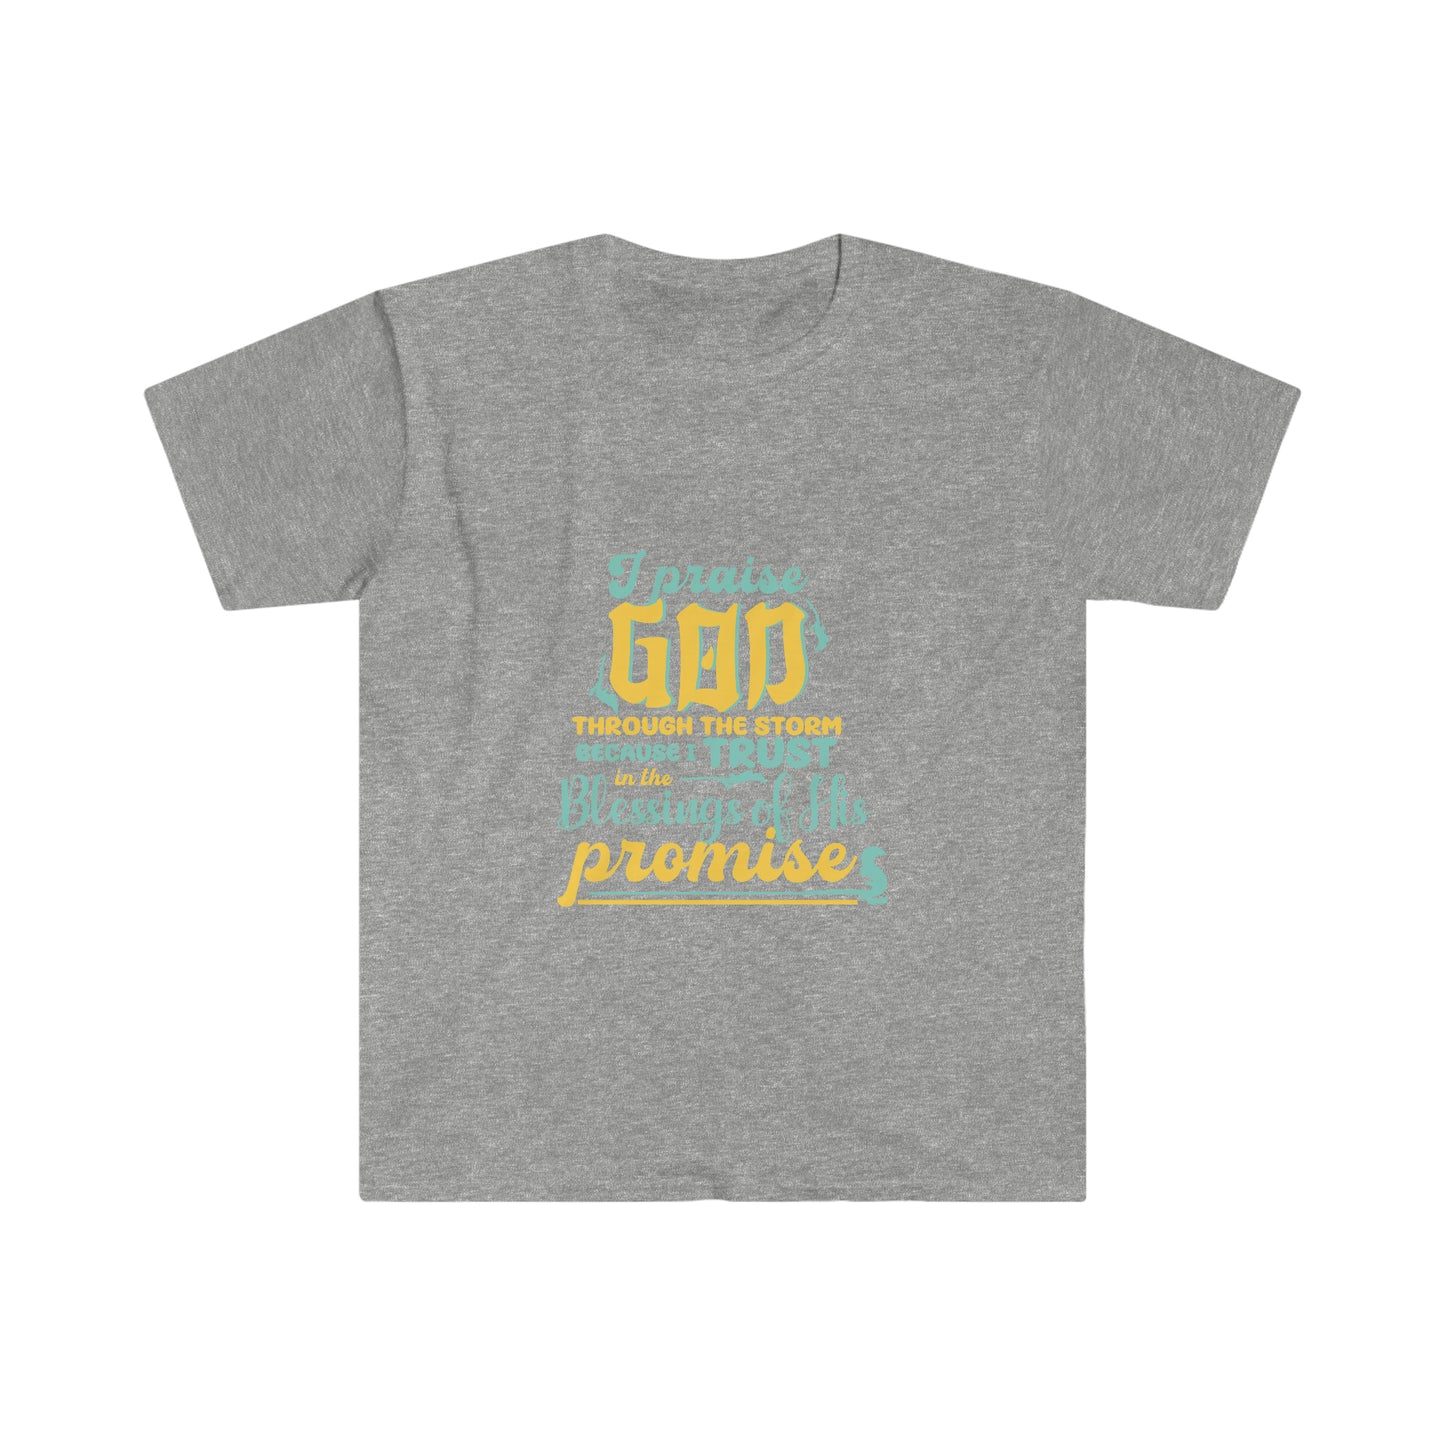 I Praise God Through The Storm Because I Trust In The Blessings Of His Promise Unisex T-shirt